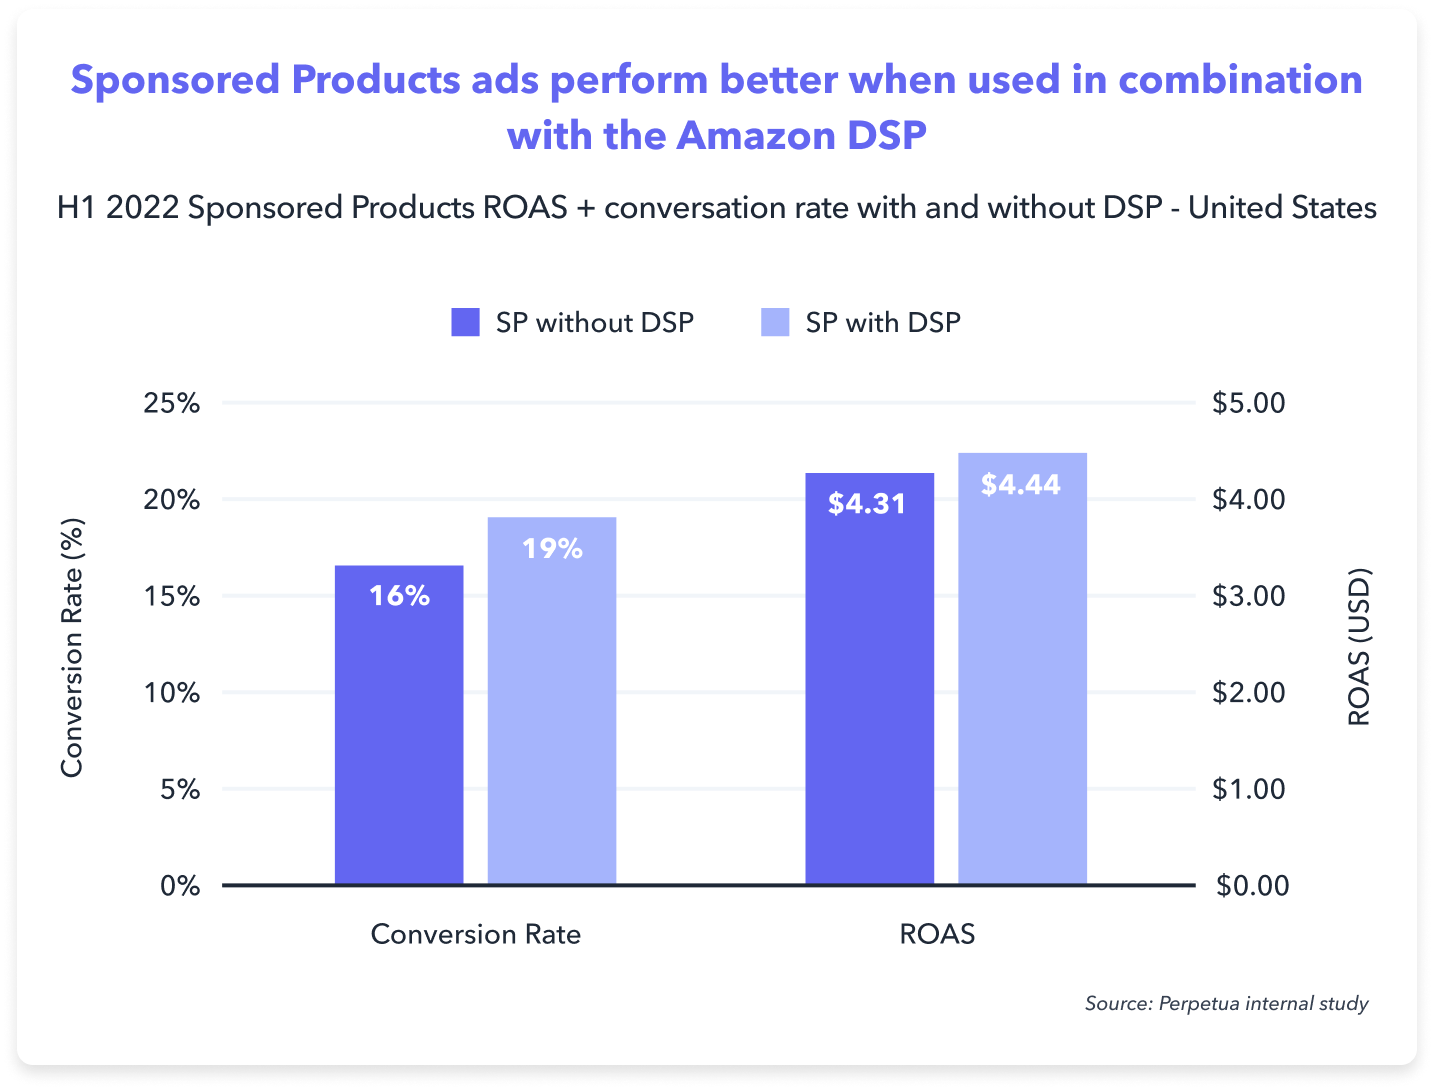 Perpetua Sponsored Products ads perform better when used in combination with the Amazon DSP